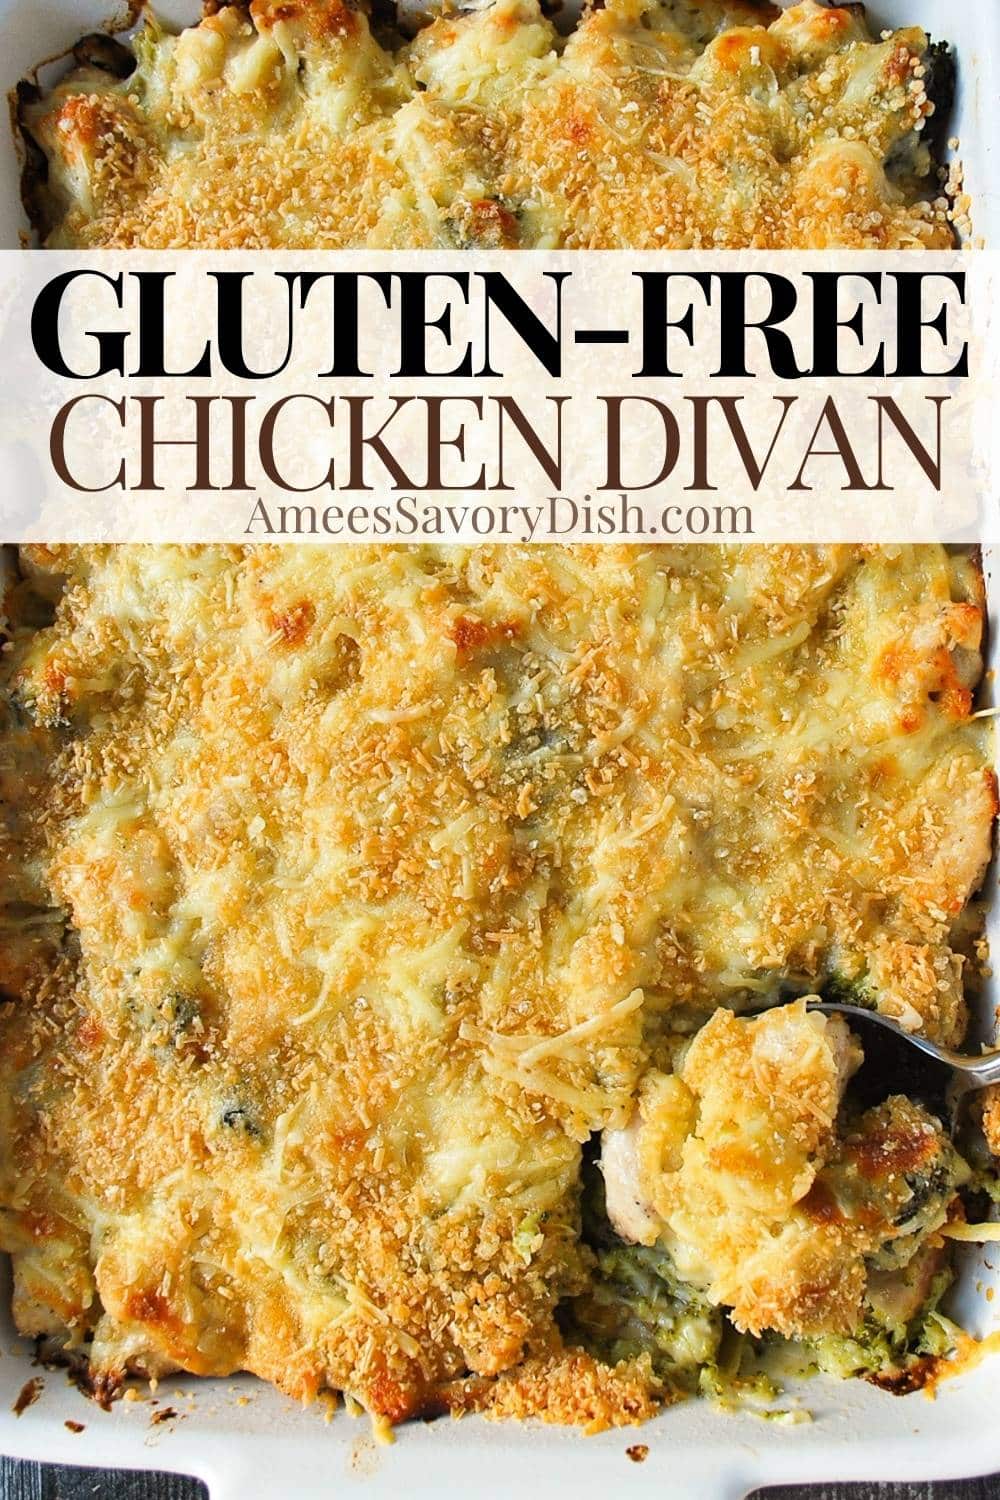 This Gluten-free Chicken Divan delivers broccoli florets and succulent chicken in a rich, creamy, and incredibly cheesy casserole. via @Ameessavorydish